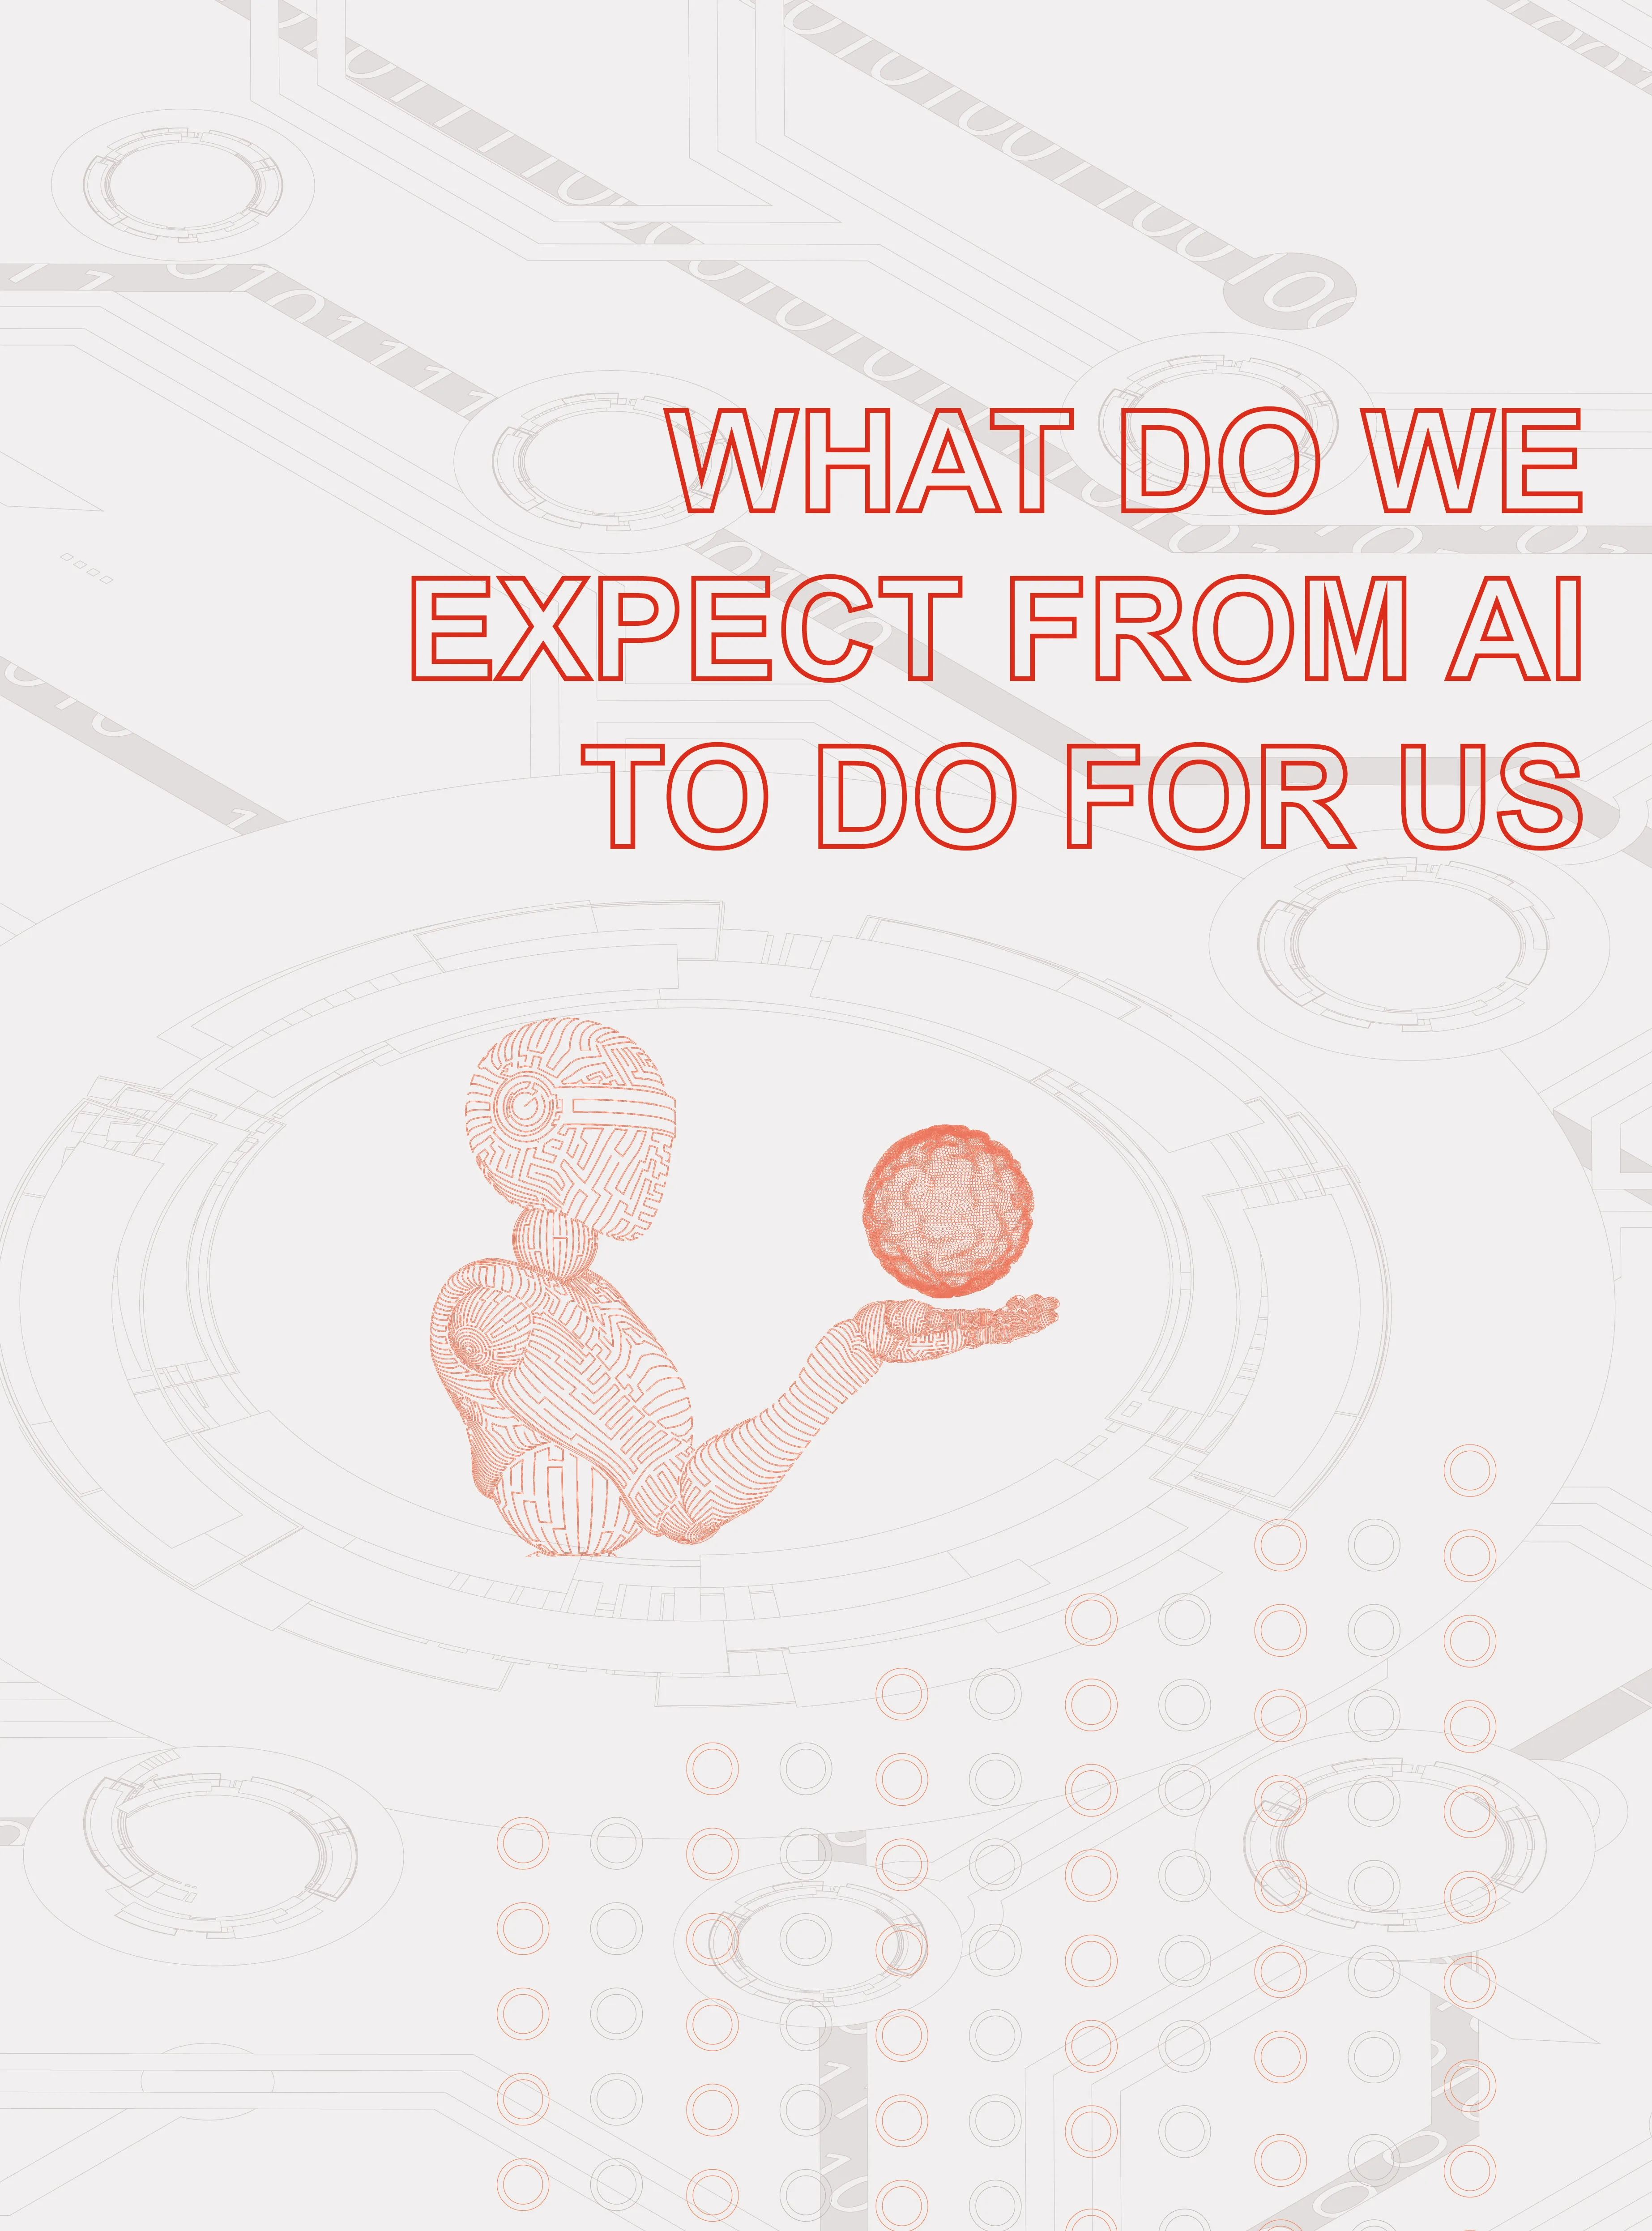 What do we expect from ai to do for us